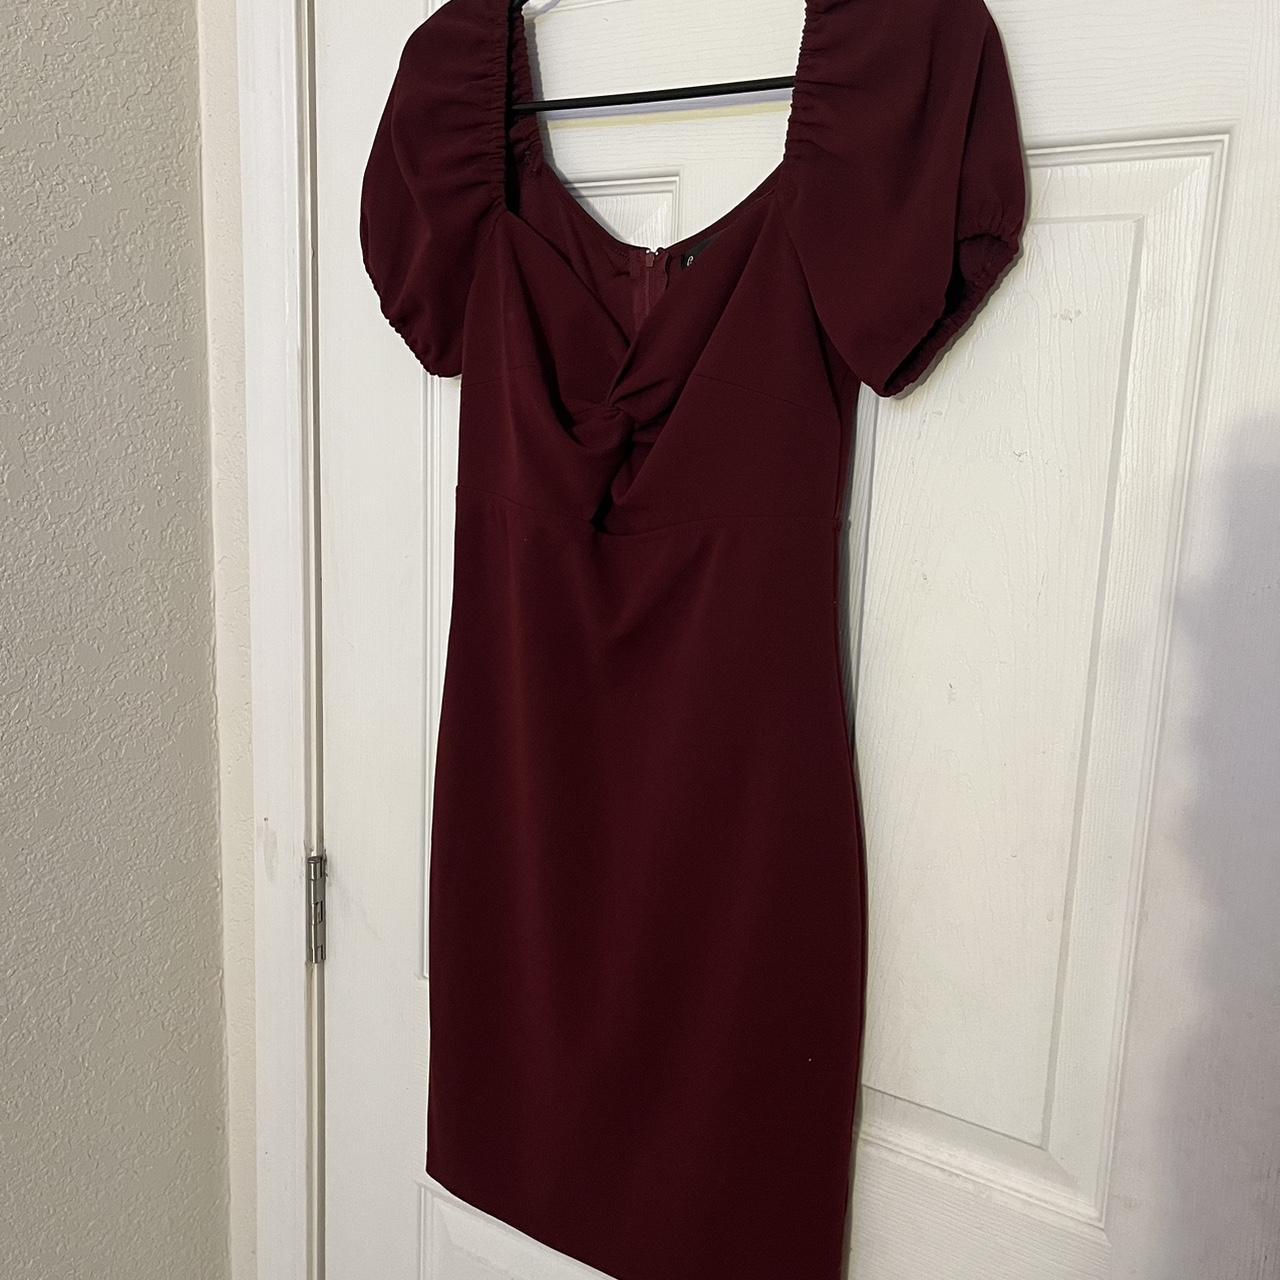 Crystal Doll Women's Burgundy and Red Dress (2)